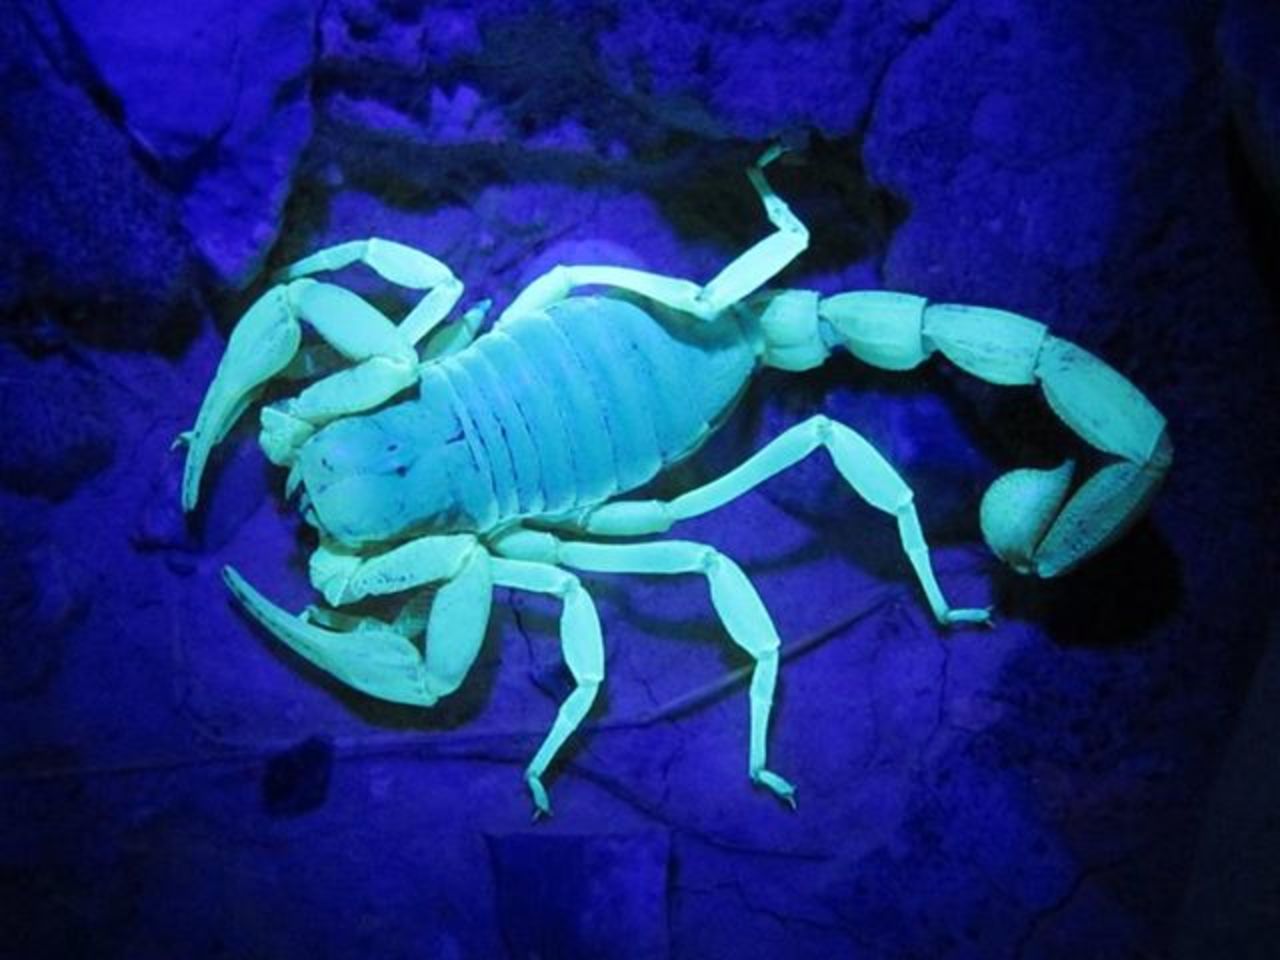 Nevada's national wildlife refuges are home to scorpions, an arachnid with an exoskeleton that glows under an ultraviolet light.